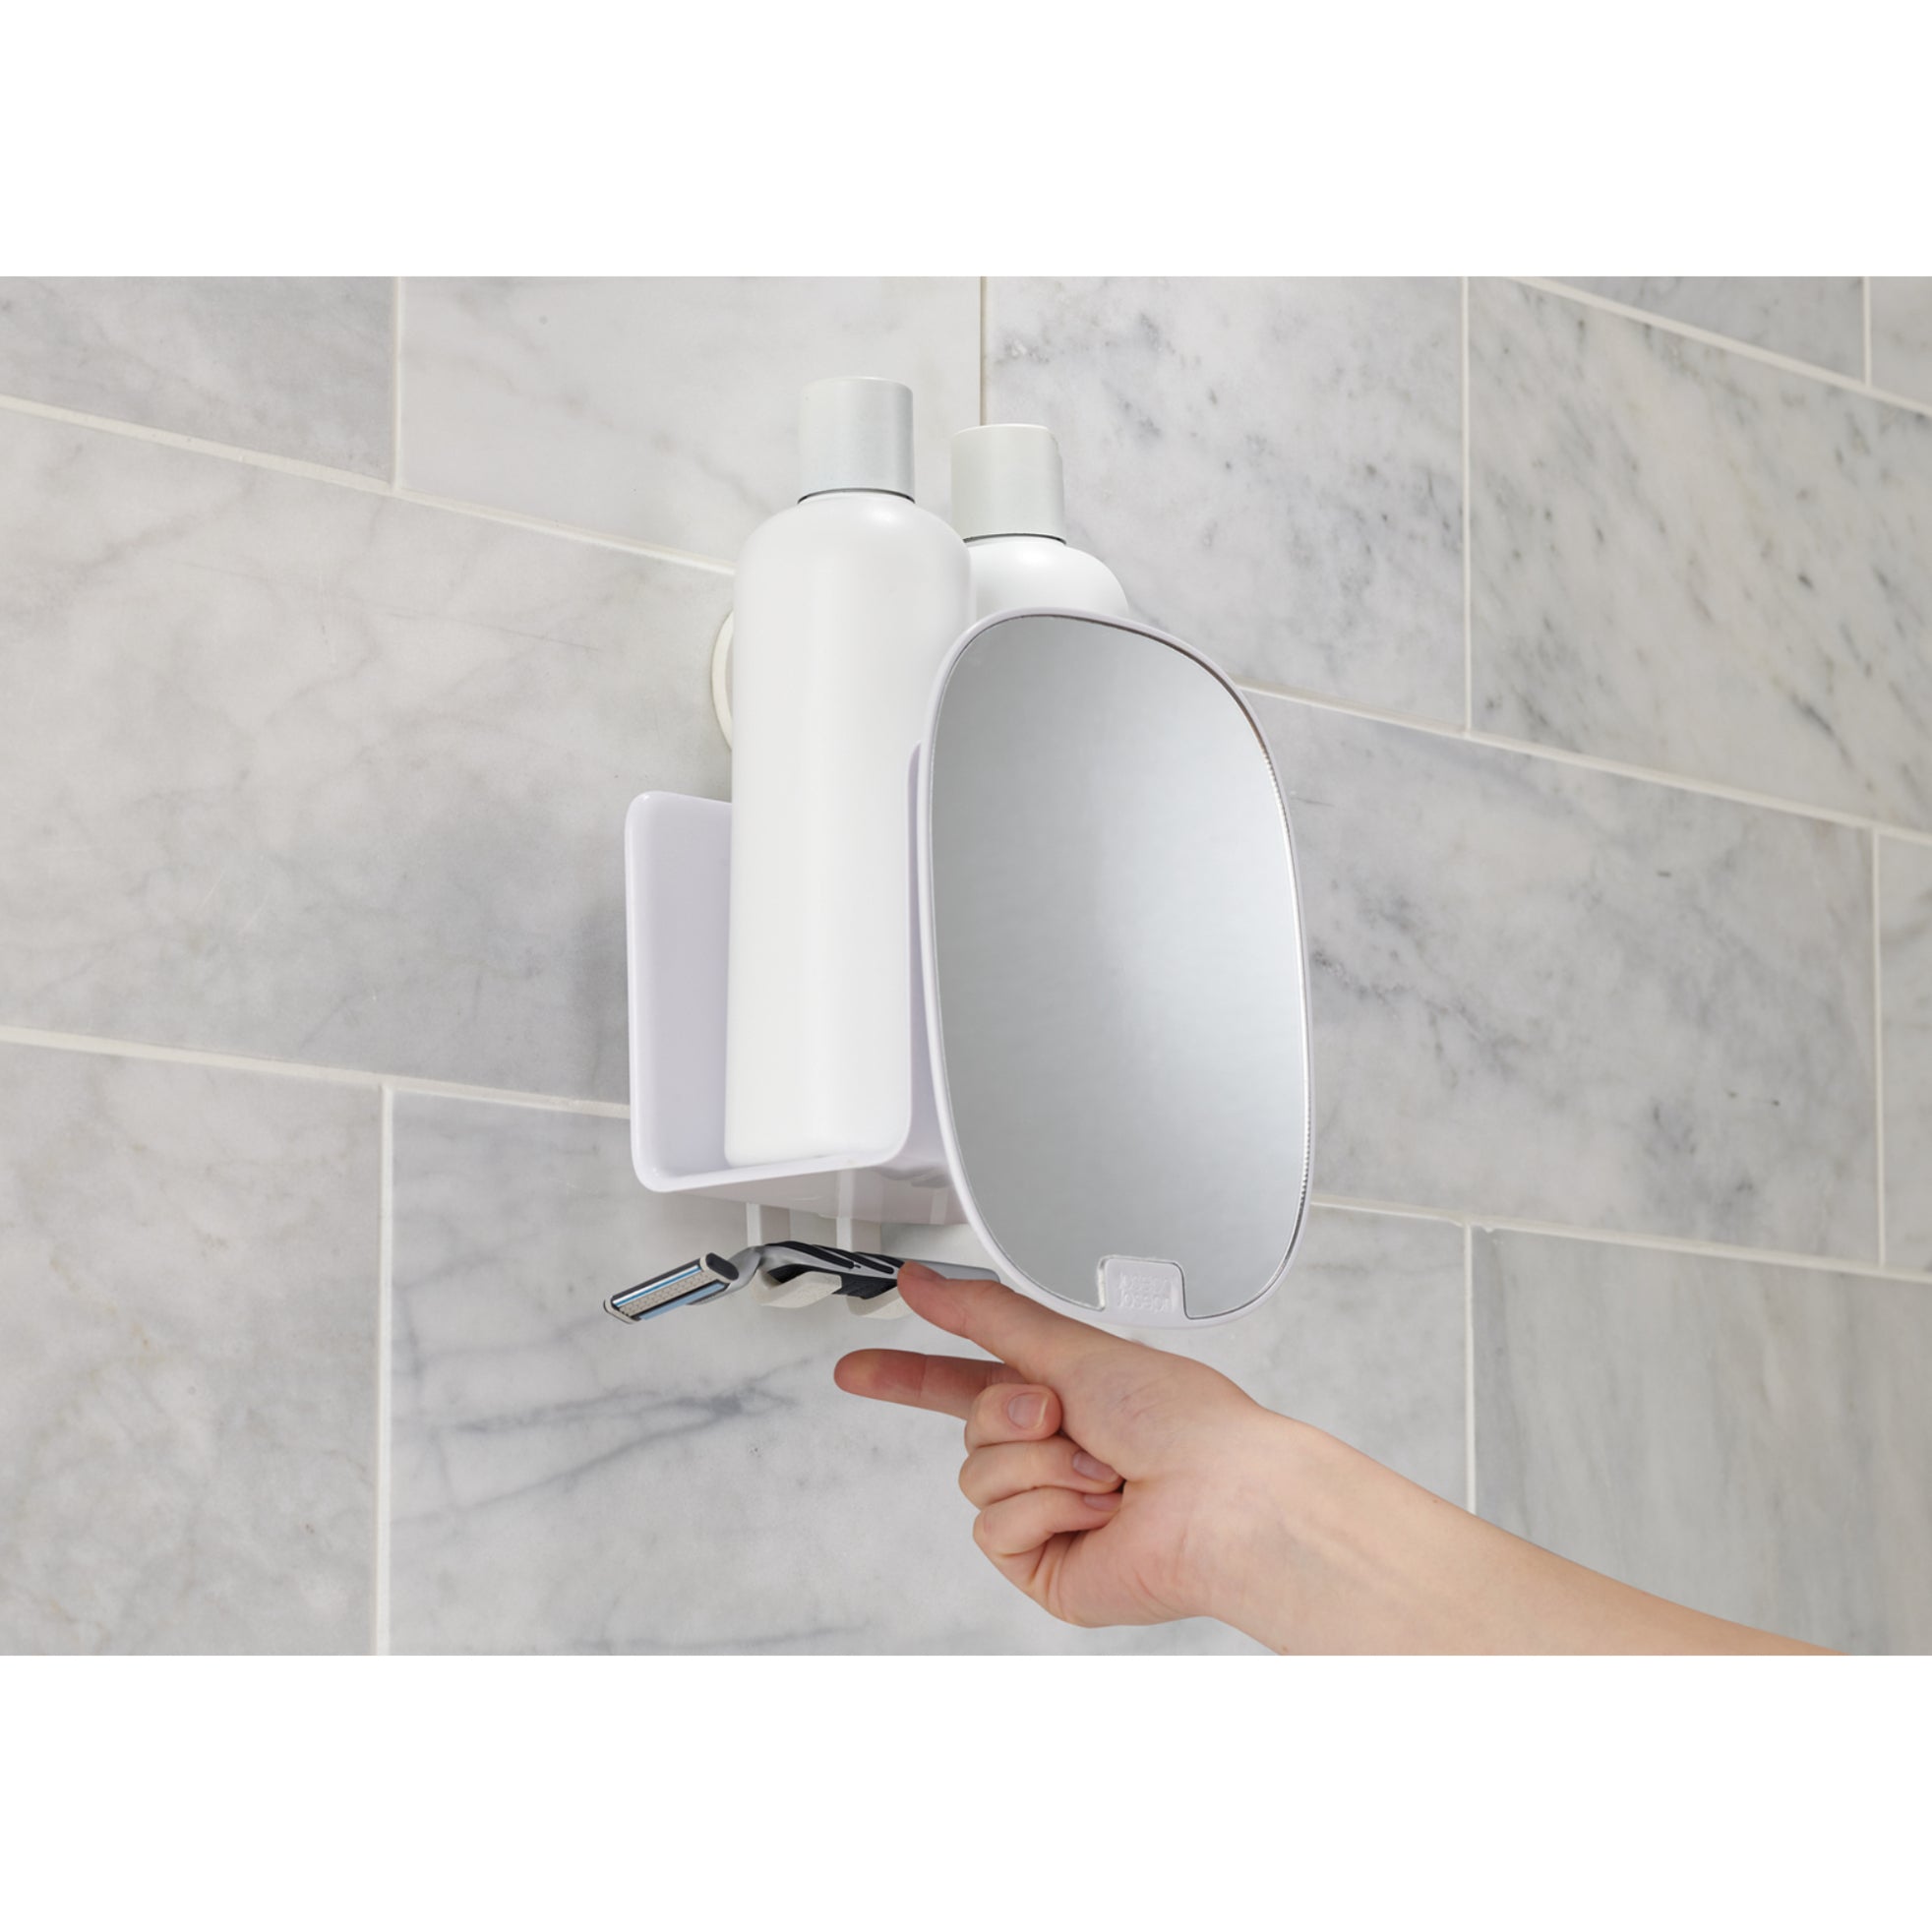 EasyStore Compact Shower Caddy - White